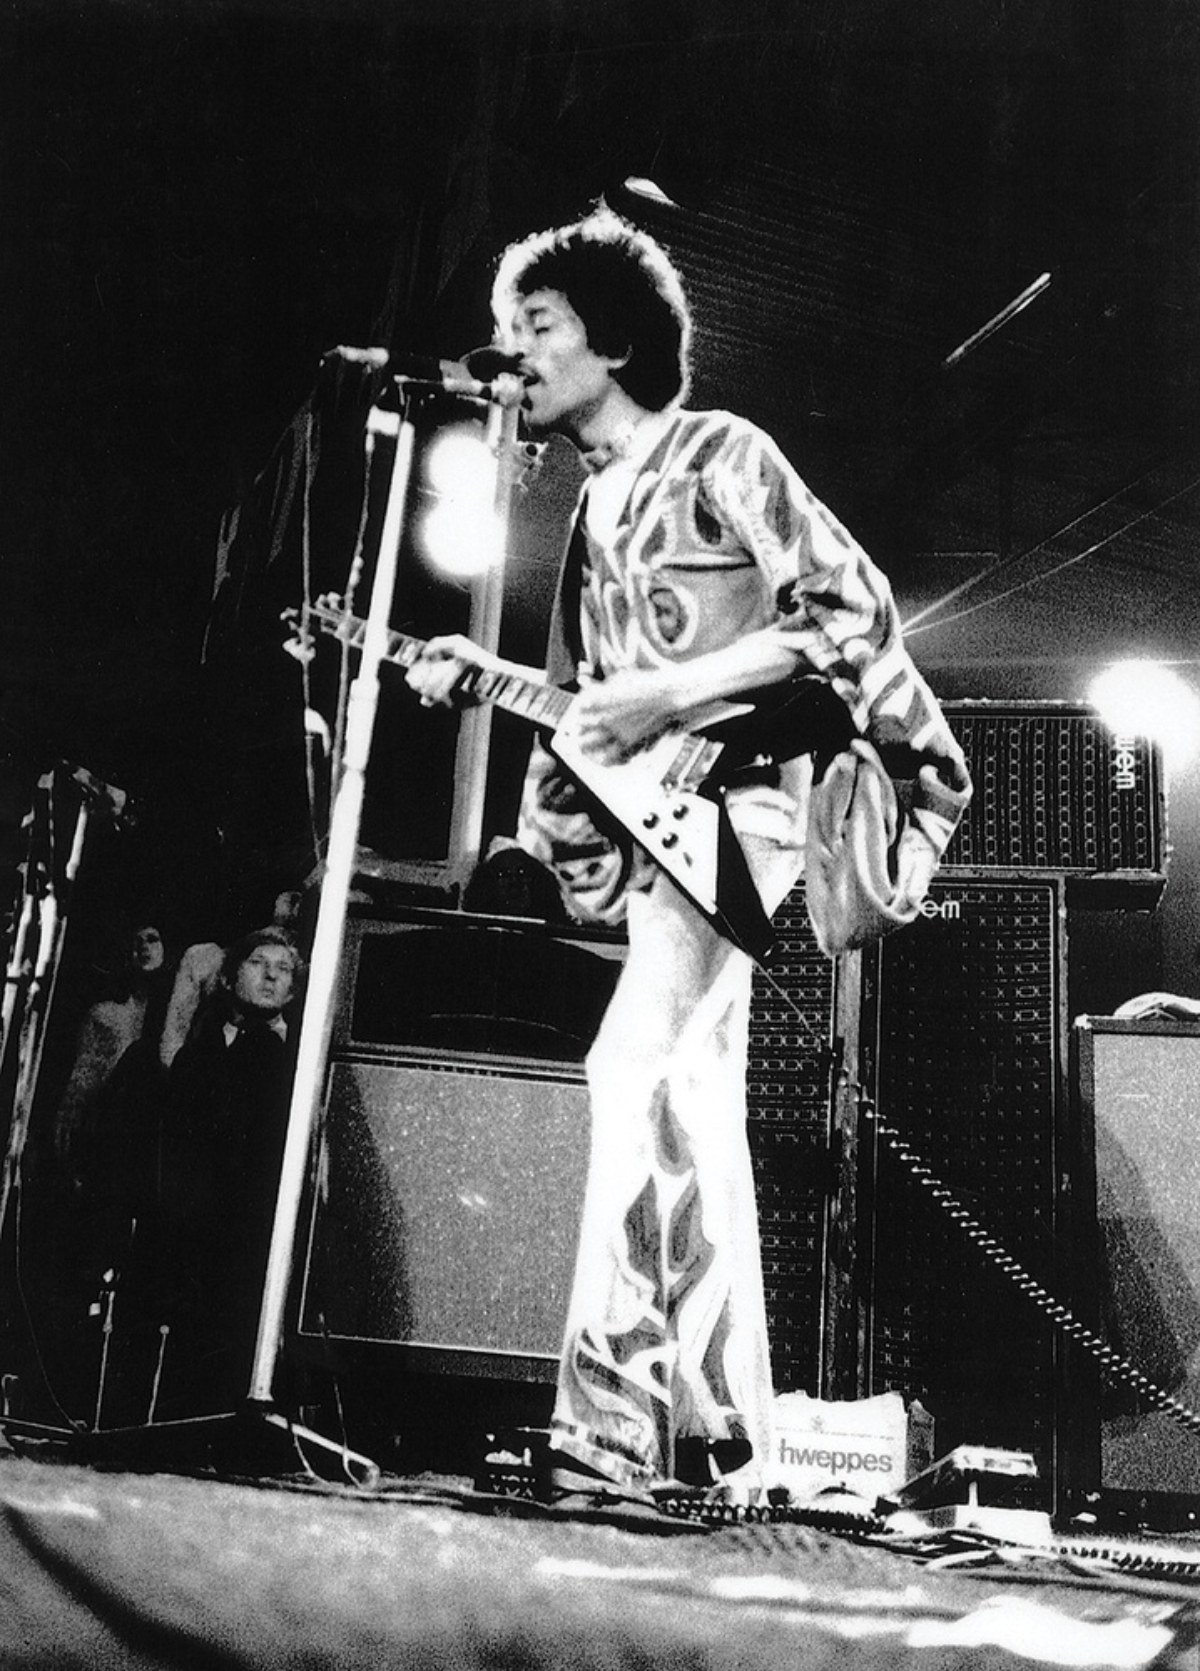 Jimi Hendrix at the Isle of Wight festival in 1970.